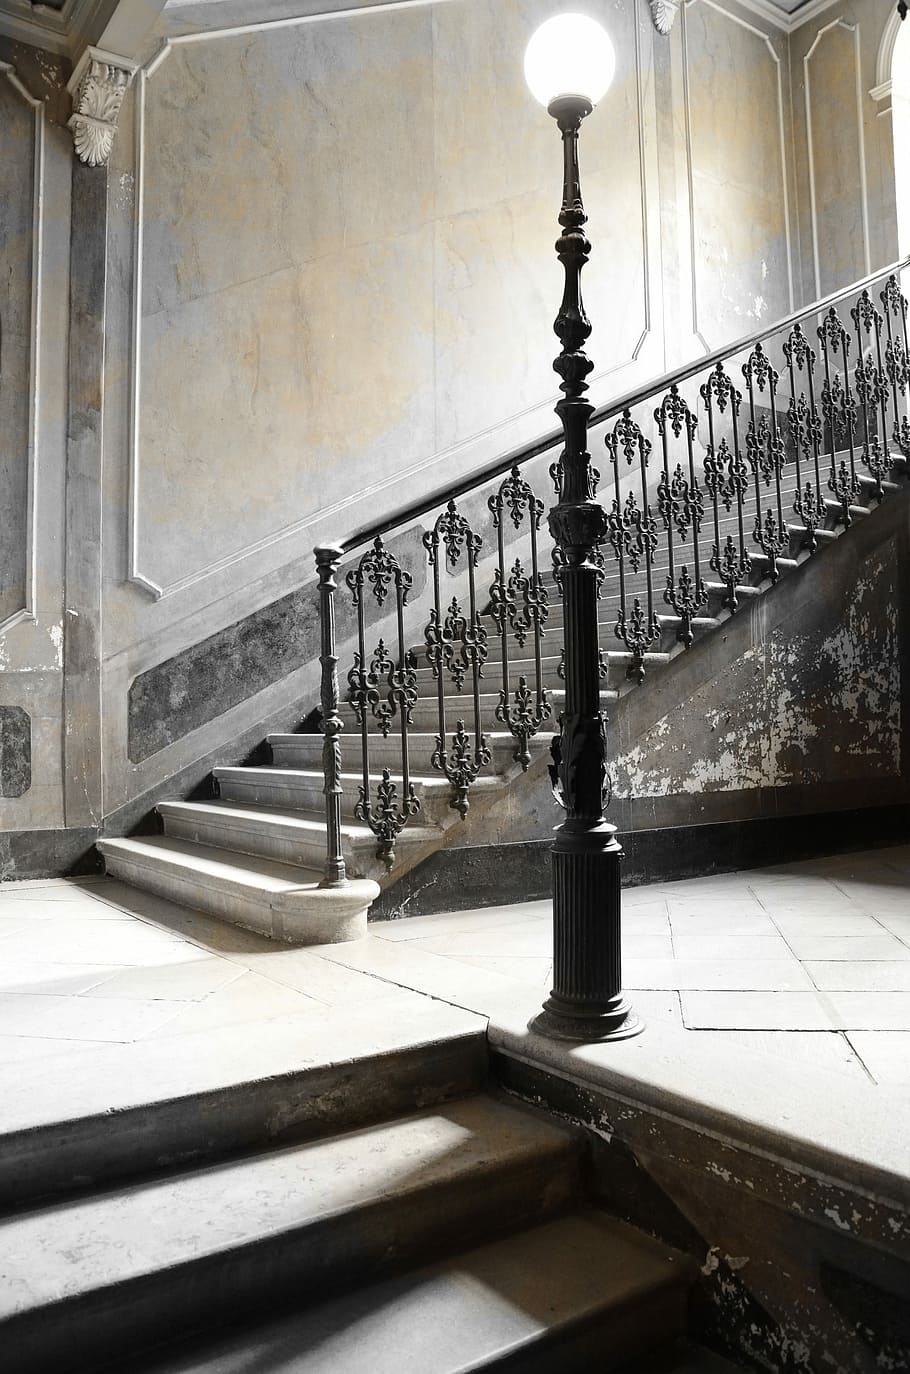 Lamppost, Stairs, Door, House, Lamp, railing, staircase, architecture, marble, architectural column